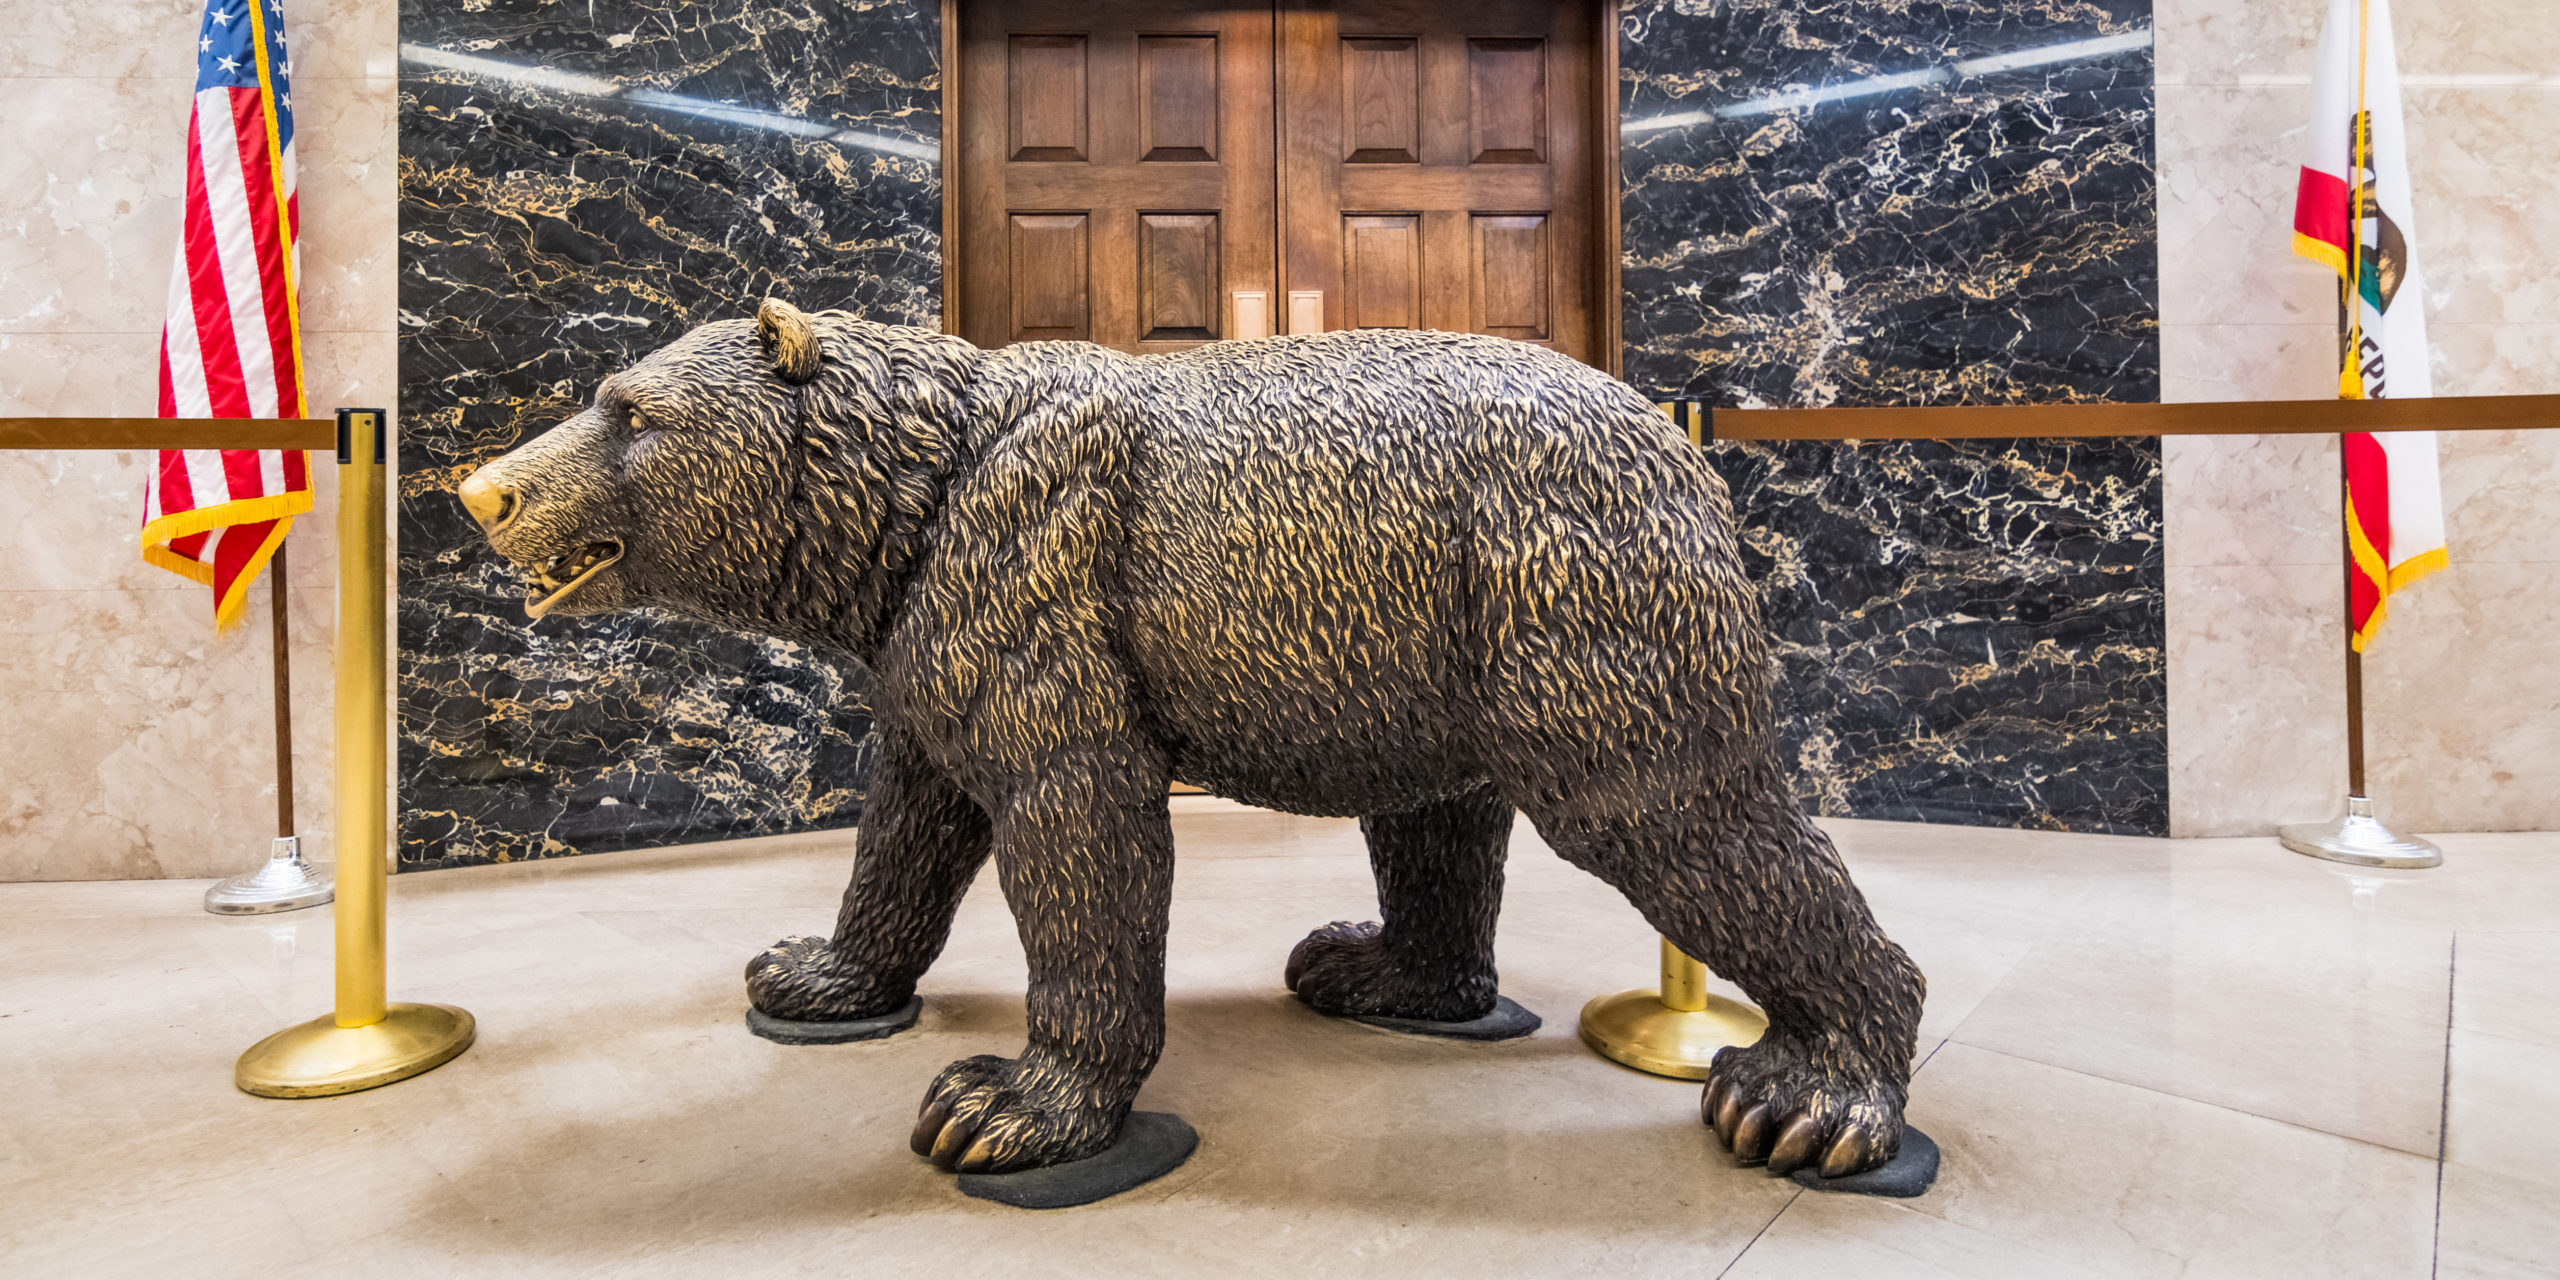 California Grizzly Bear Statue Placed In Front Of The Governor's Office In The California Capitol State Building, Sacramento